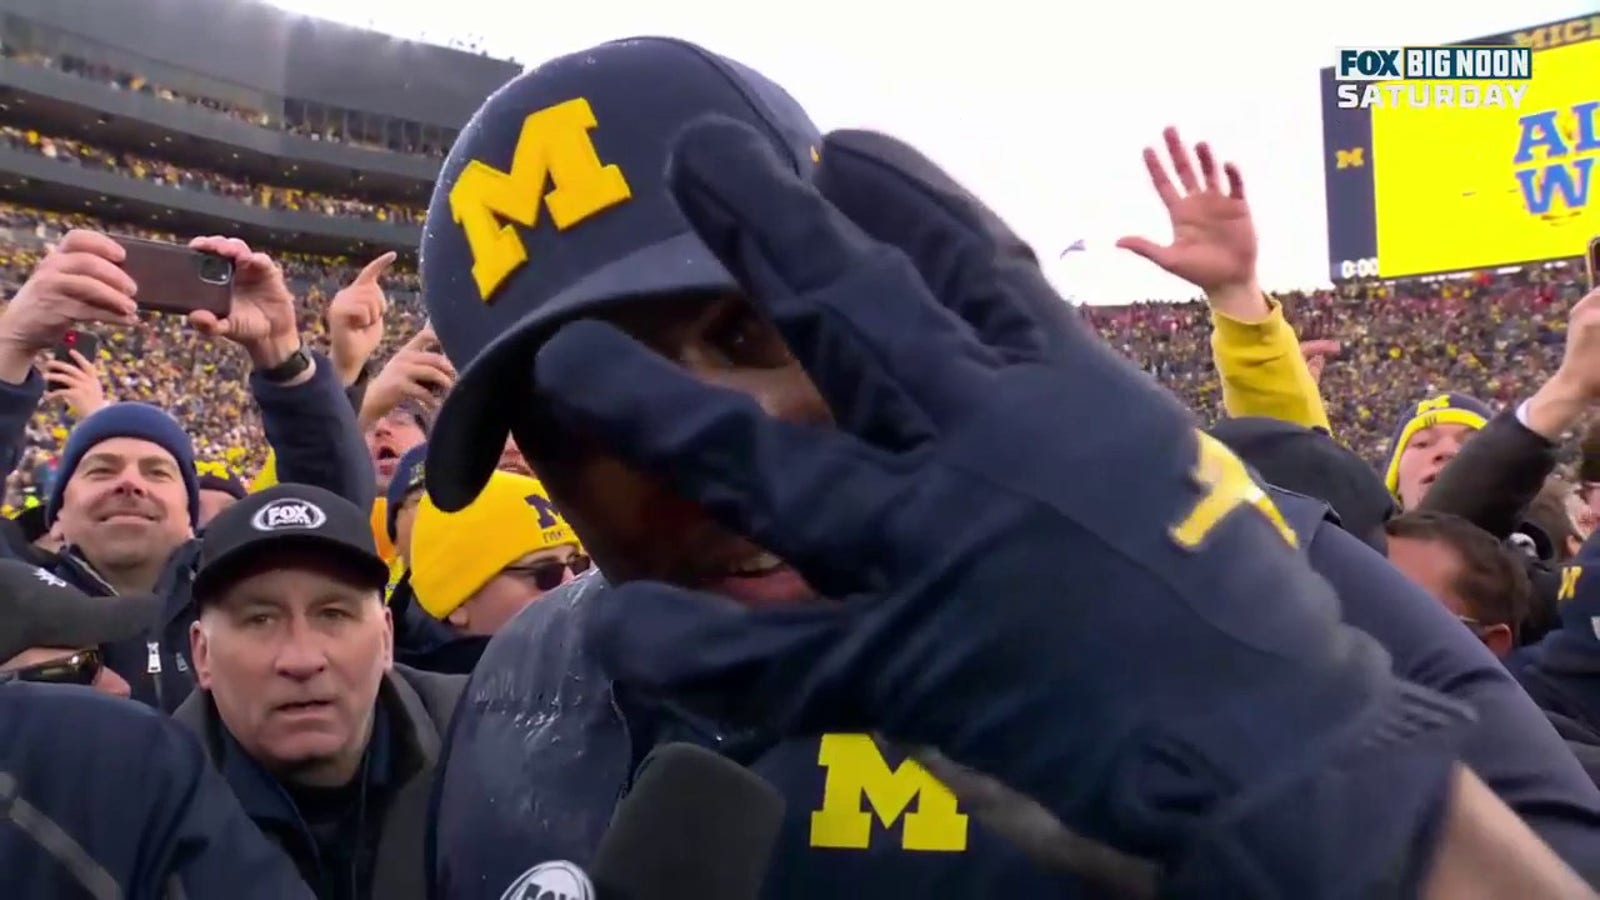 Sherrone Moore speaks on Michigan's win over Ohio State as fans storm the field